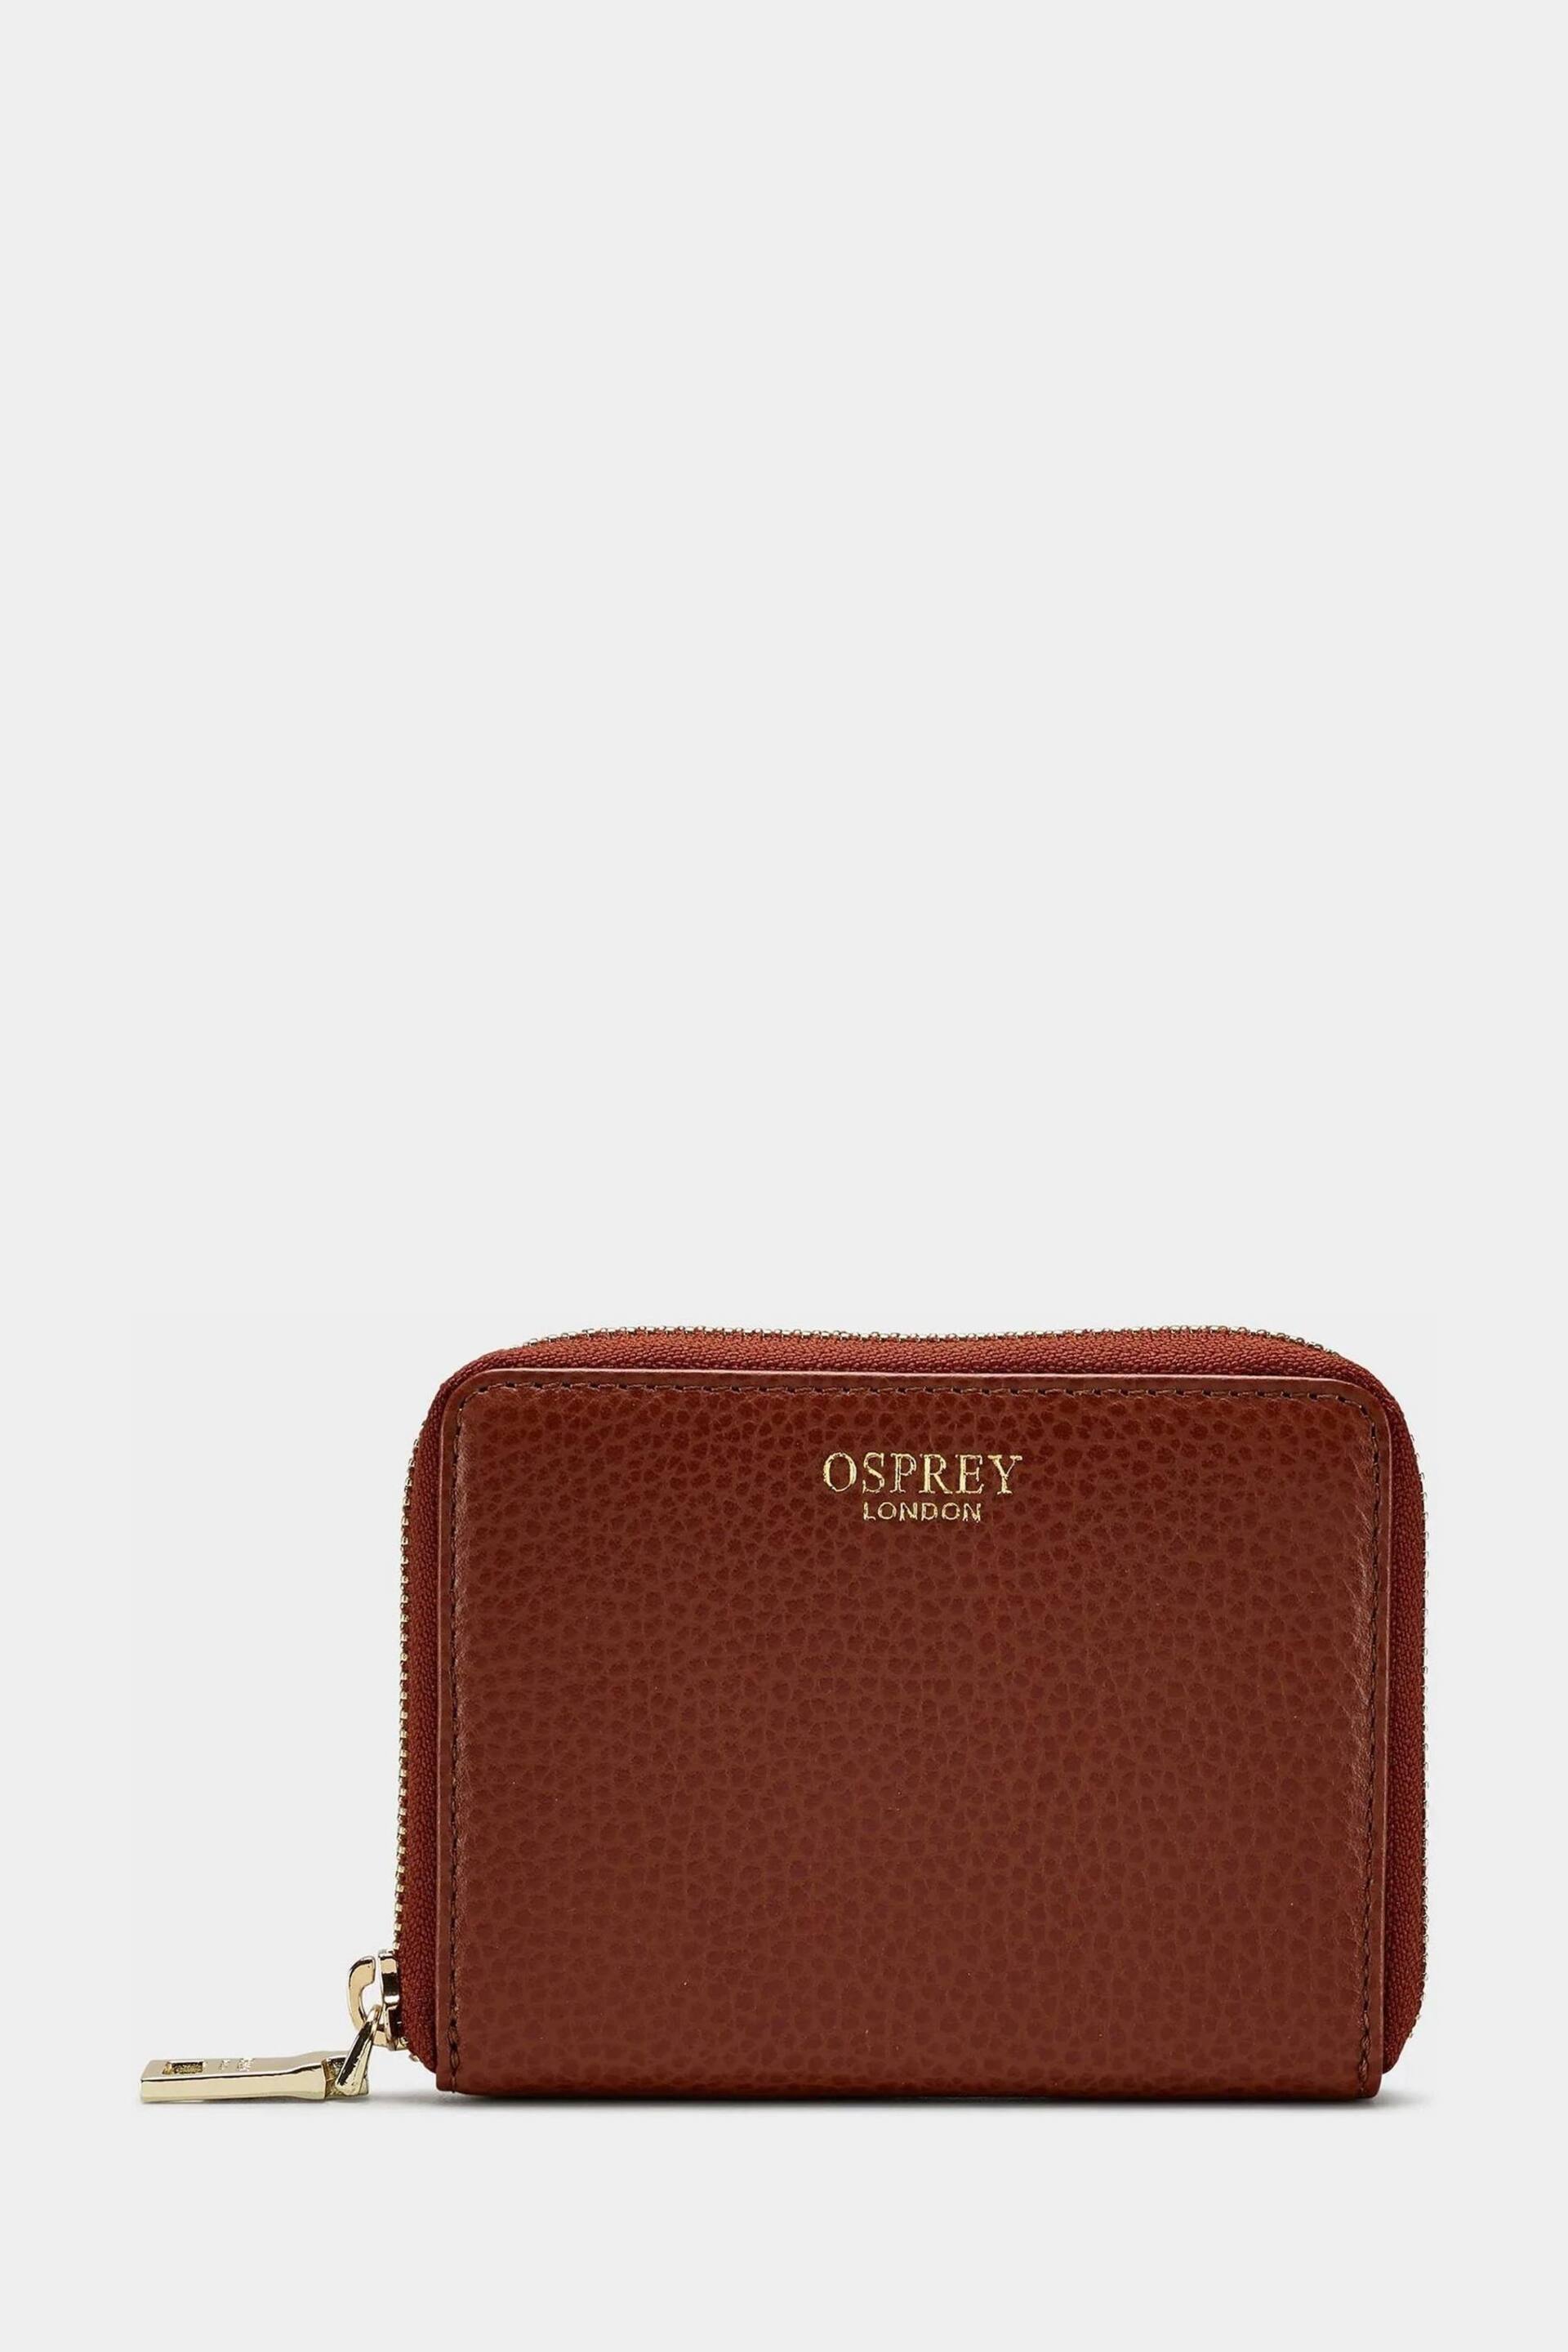 OSPREY LONDON Red The Collier Leather Zip-Round Purse - Image 2 of 4